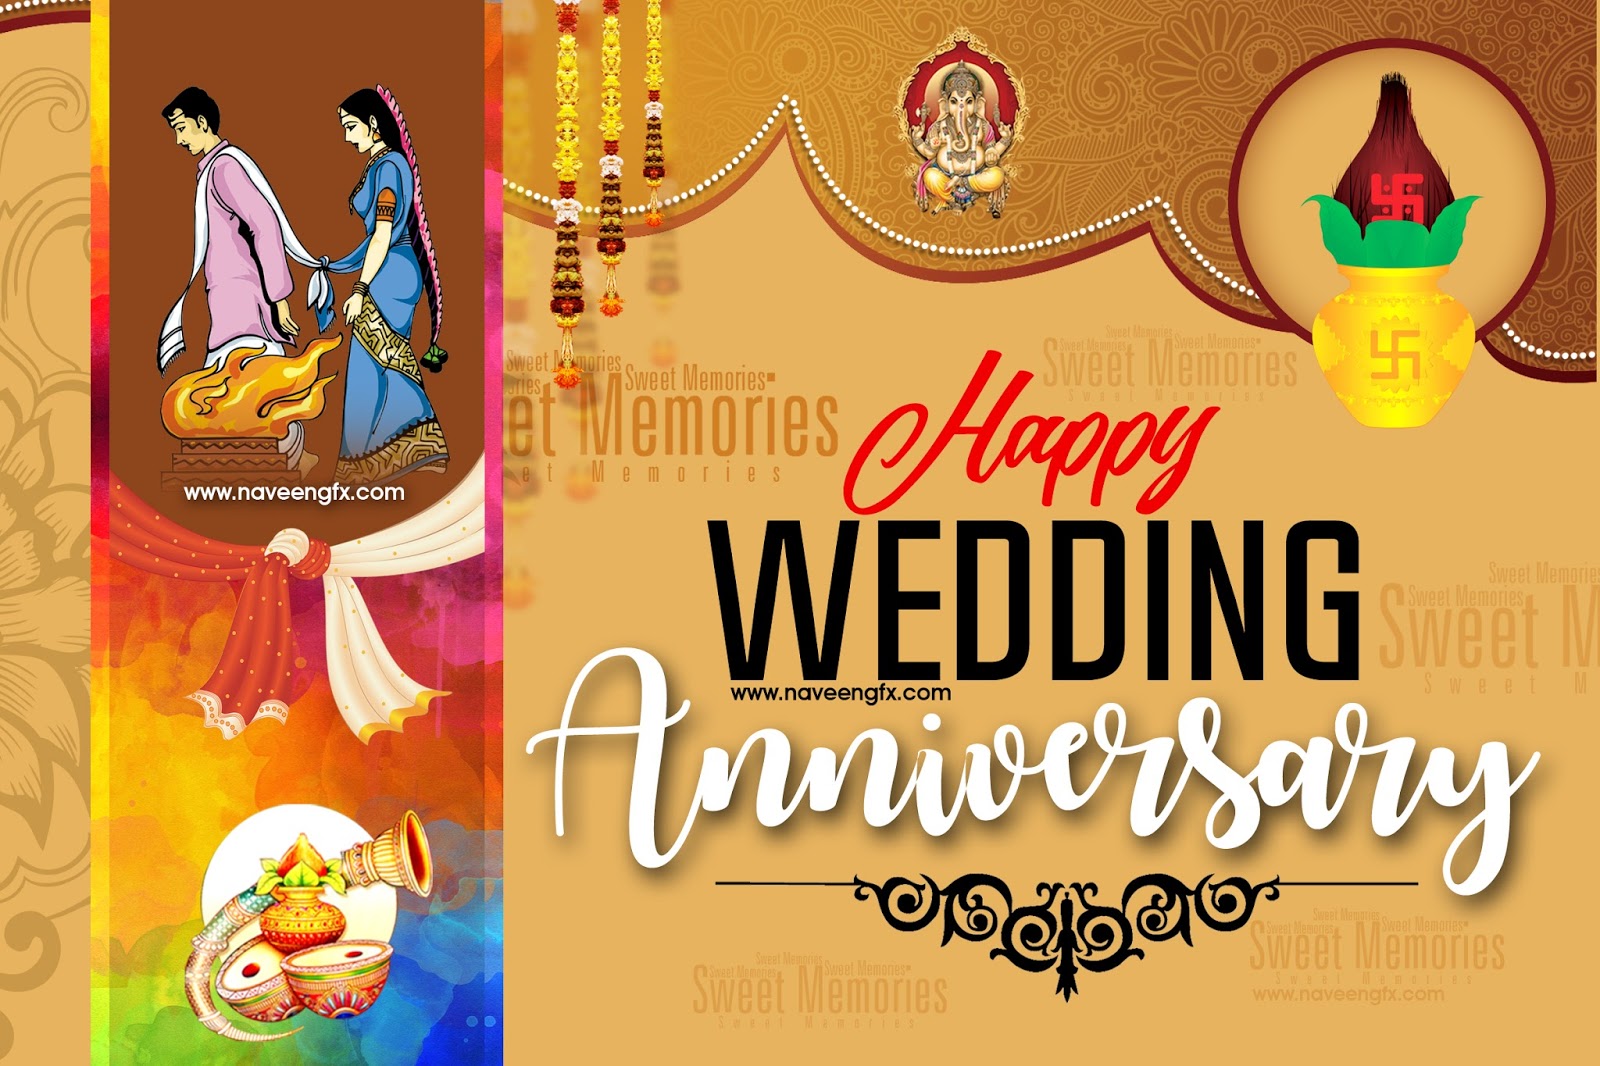 Wedding anniversary wishes for friends and family hd wallpapers | naveengfx